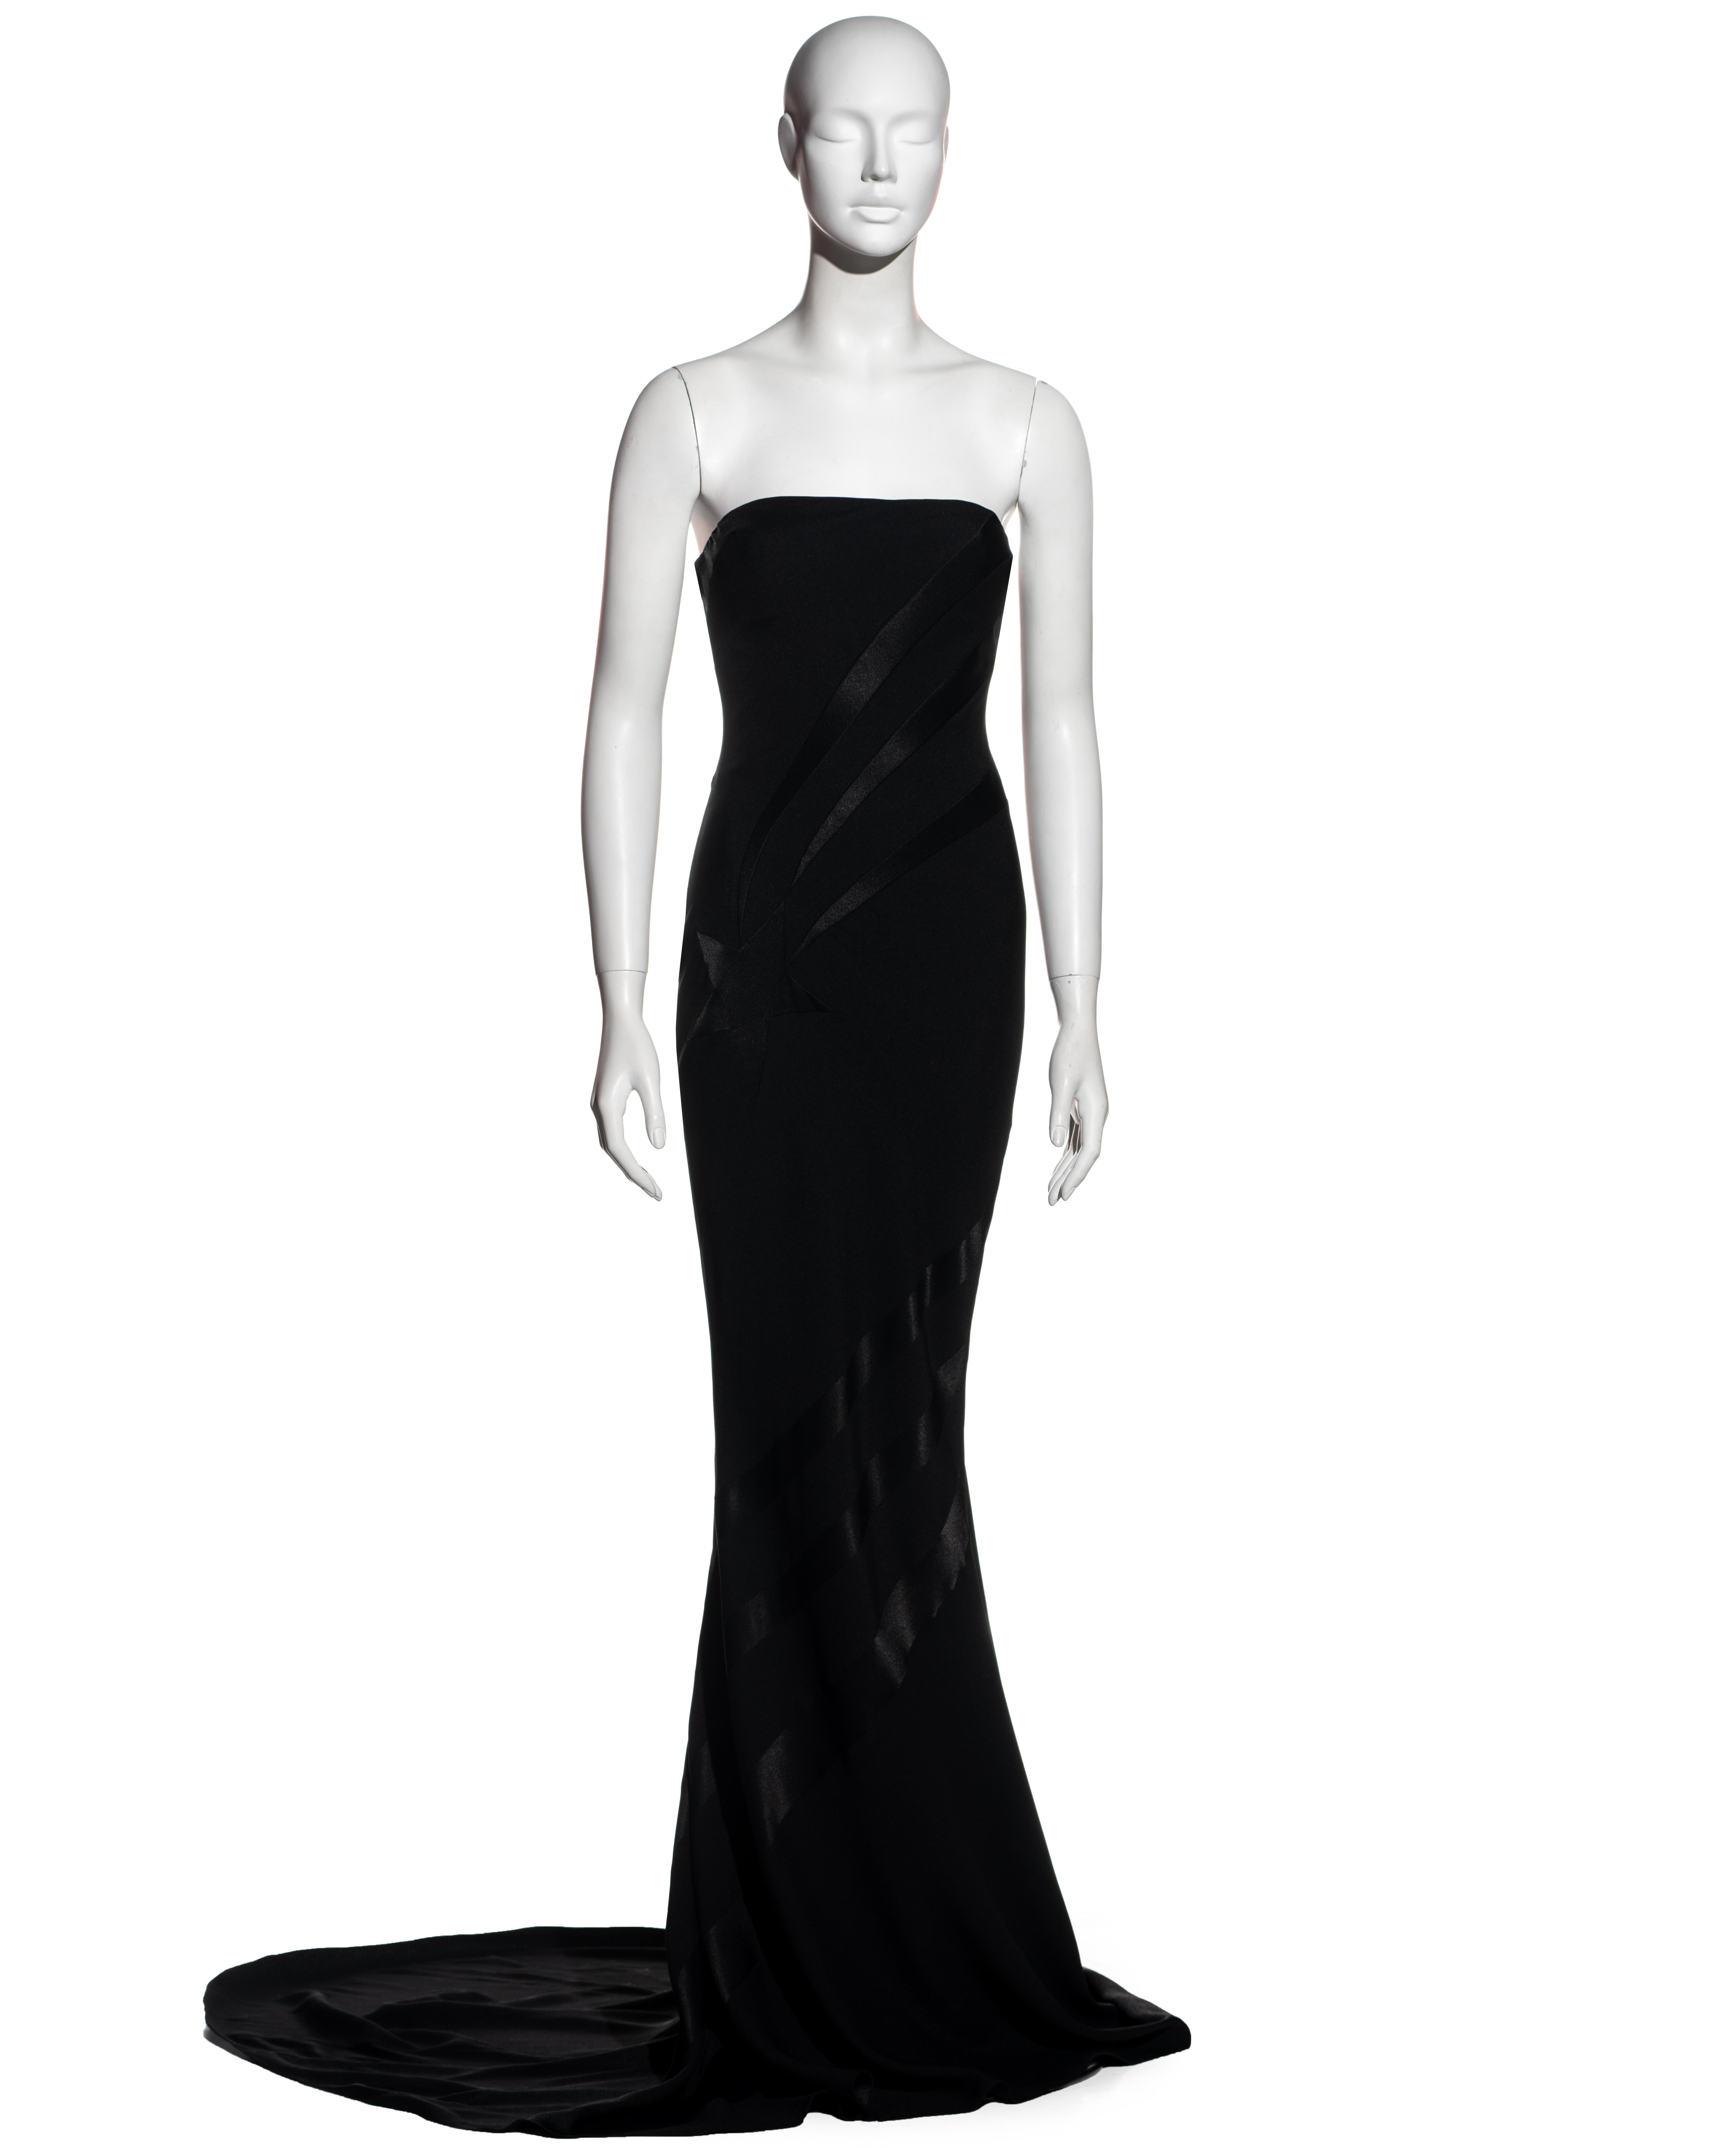 ▪ John Galliano black satin-backed crepe strapless bias-cut evening dress 
▪ Shooting star panels at front and back
▪ Built-in silk corseted bustier with padded bra 
▪ Trained skirt 
▪ 80% Acetate, 20% Rayon
▪ FR 40 - UK 12 - US 8
▪ Spring-Summer